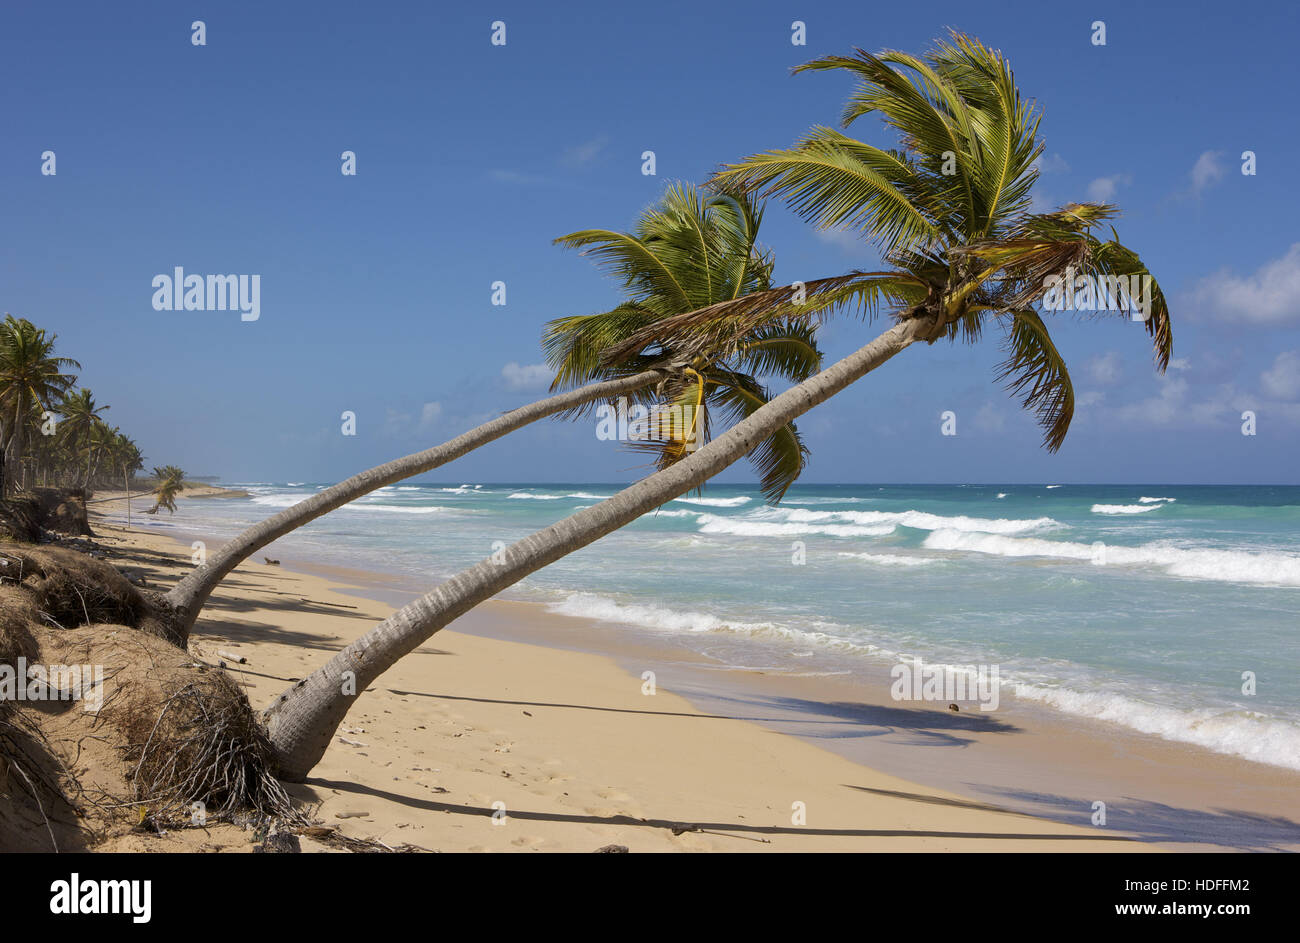 Coconut palms at the beach, Dominican Republic, Caribbean Stock Photo